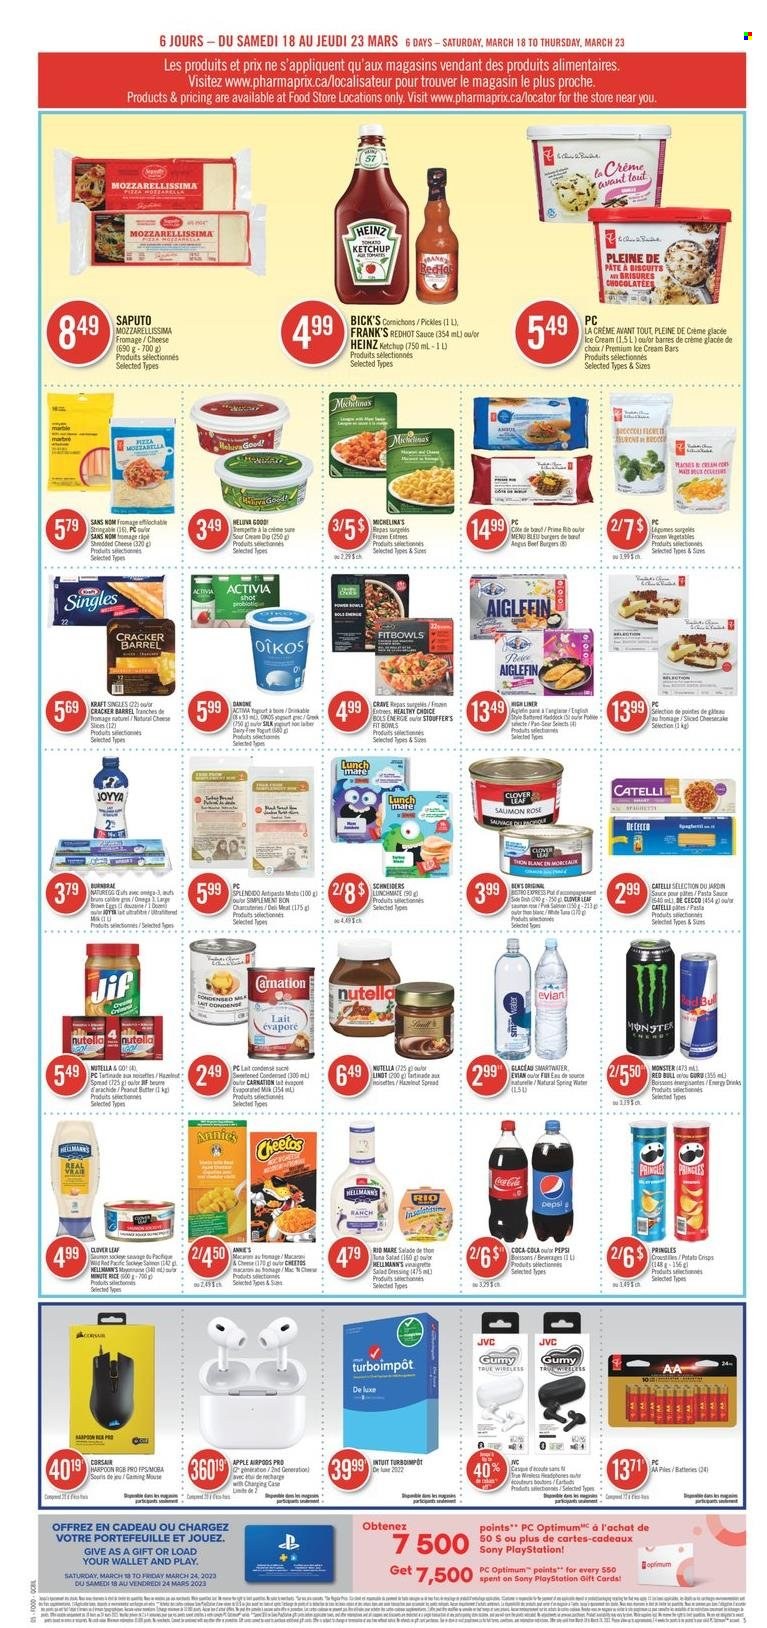 thumbnail - Pharmaprix Flyer - March 18, 2023 - March 23, 2023 - Sales products - gaming mouse, Sony, Apple, haddock, pizza, pasta sauce, hamburger, sauce, beef burger, Healthy Choice, Kraft®, sandwich slices, shredded cheese, Kraft Singles, Clover, Activia, Oikos, evaporated milk, Silk, eggs, sour cream, Hellmann’s, ice cream, ice cream bars, Stouffer's, Mars, crackers, biscuit, Pringles, Cheetos, pickles, rice, salad dressing, dressing, peanut butter, hazelnut spread, Jif, Coca-Cola, Pepsi, energy drink, Monster, Oros, Red Bull, spring water, Smartwater, Evian, water, rosé wine, beef meat, Sure, battery, Optimum, Corsair, mouse, PlayStation, PS, JVC, Airpods, Apple AirPods Pro, rose, flowers, Omega-3, Heinz, ketchup, Nutella, Danone, Lindt. Page 4.